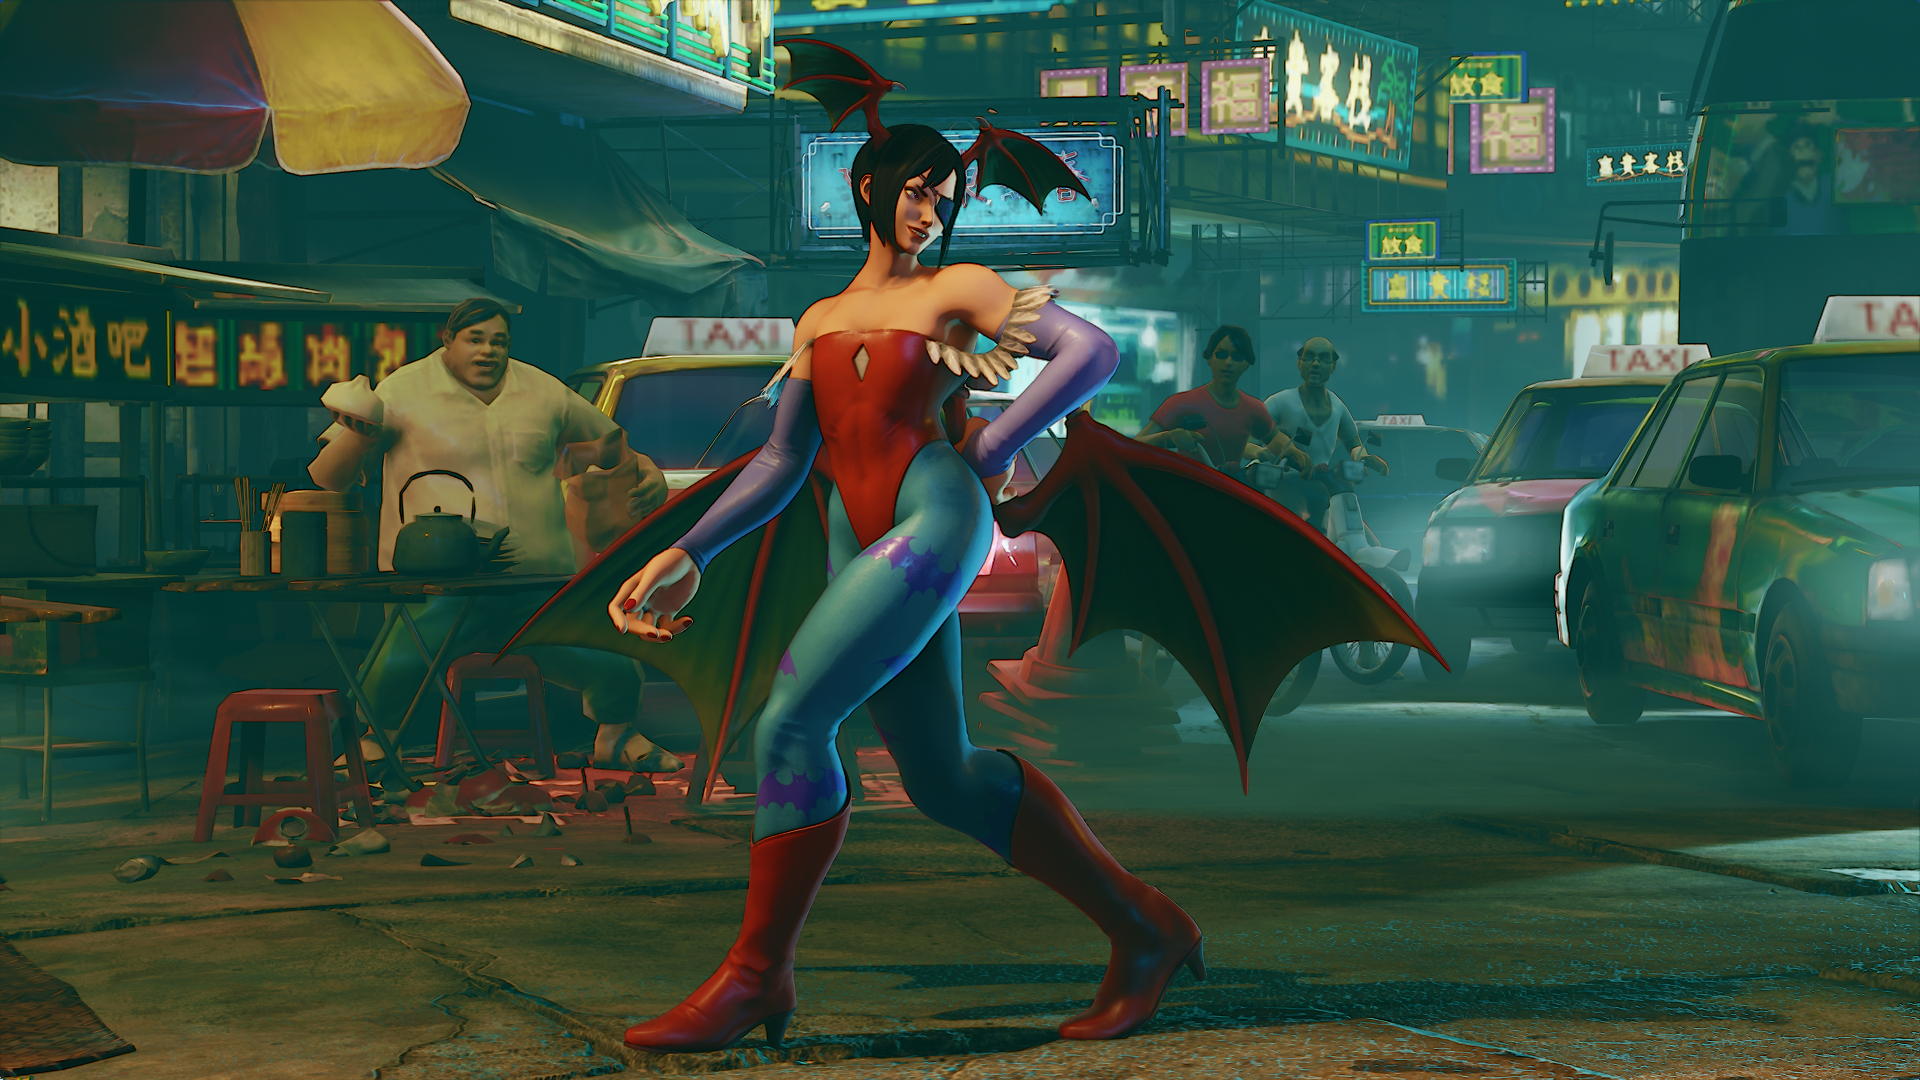 Image for Darkstalkers costumes and major balance changes hit Street Fighter 5: Arcade Edition today